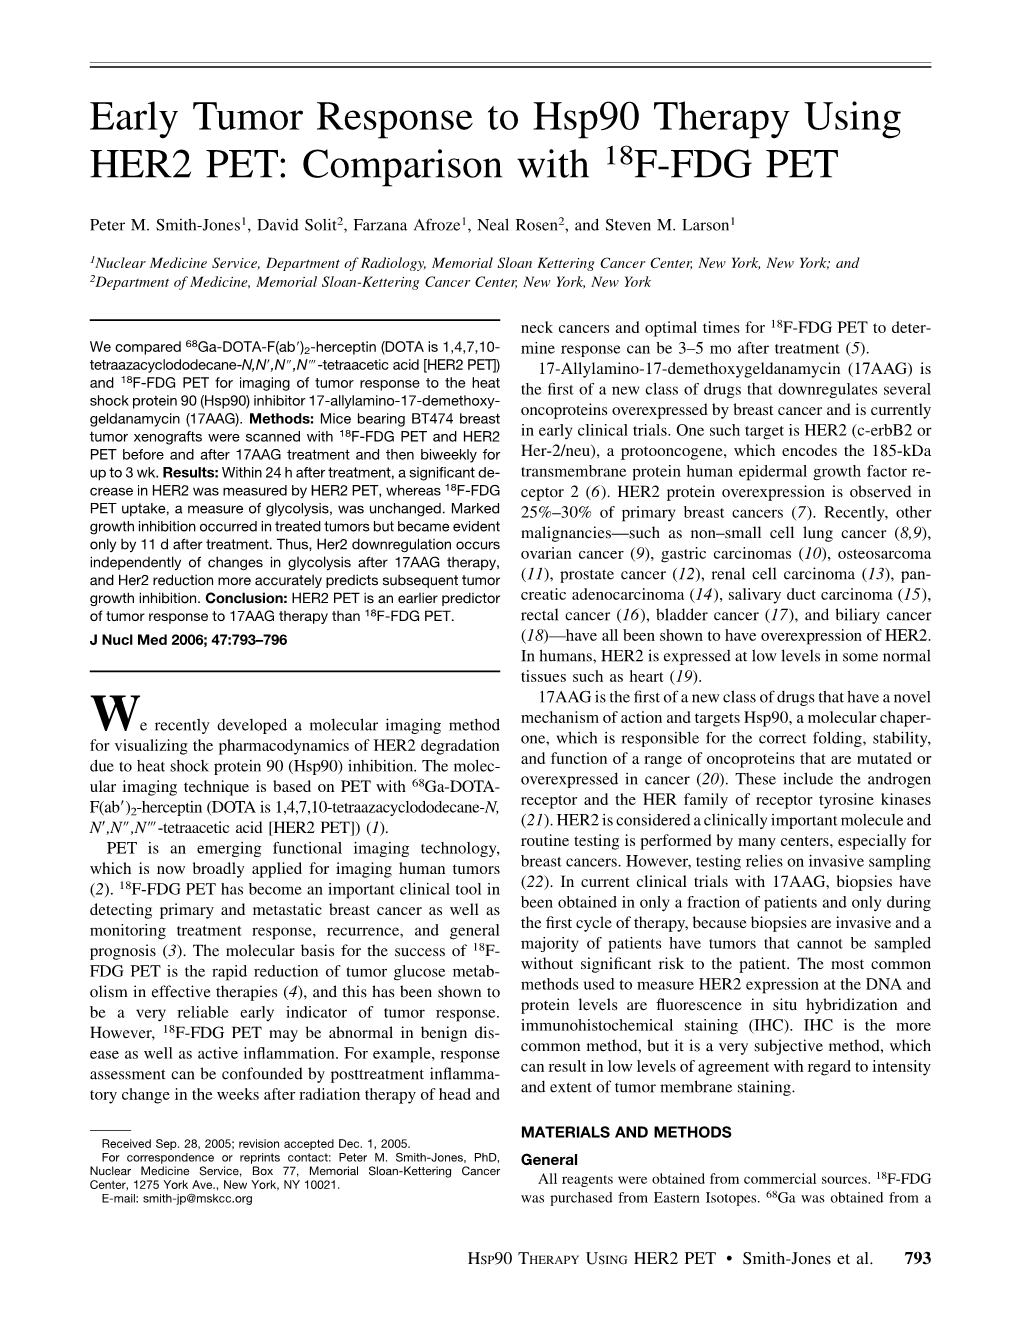 Early Tumor Response to Hsp90 Therapy Using HER2 PET: Comparison with 18F-FDG PET